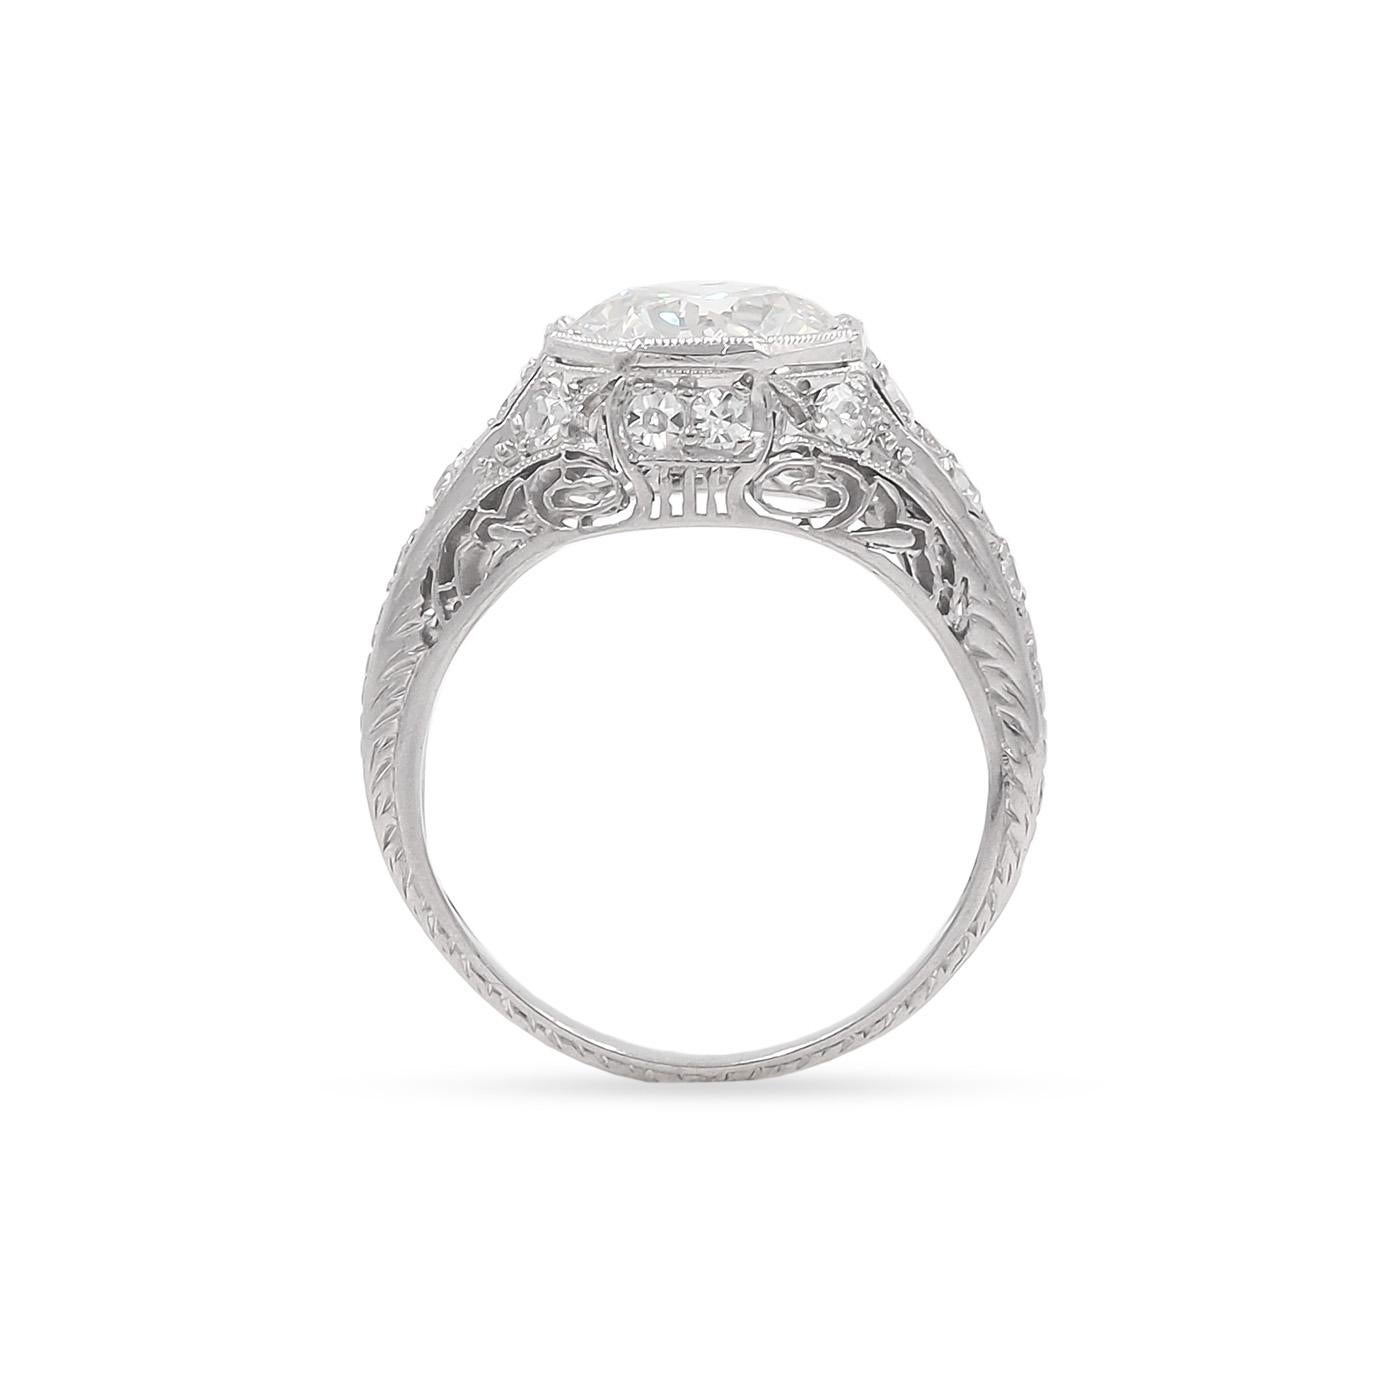 Round Cut Art Deco 1.97 Carat GIA Certified Transitional Cut Diamond Engagement Ring For Sale